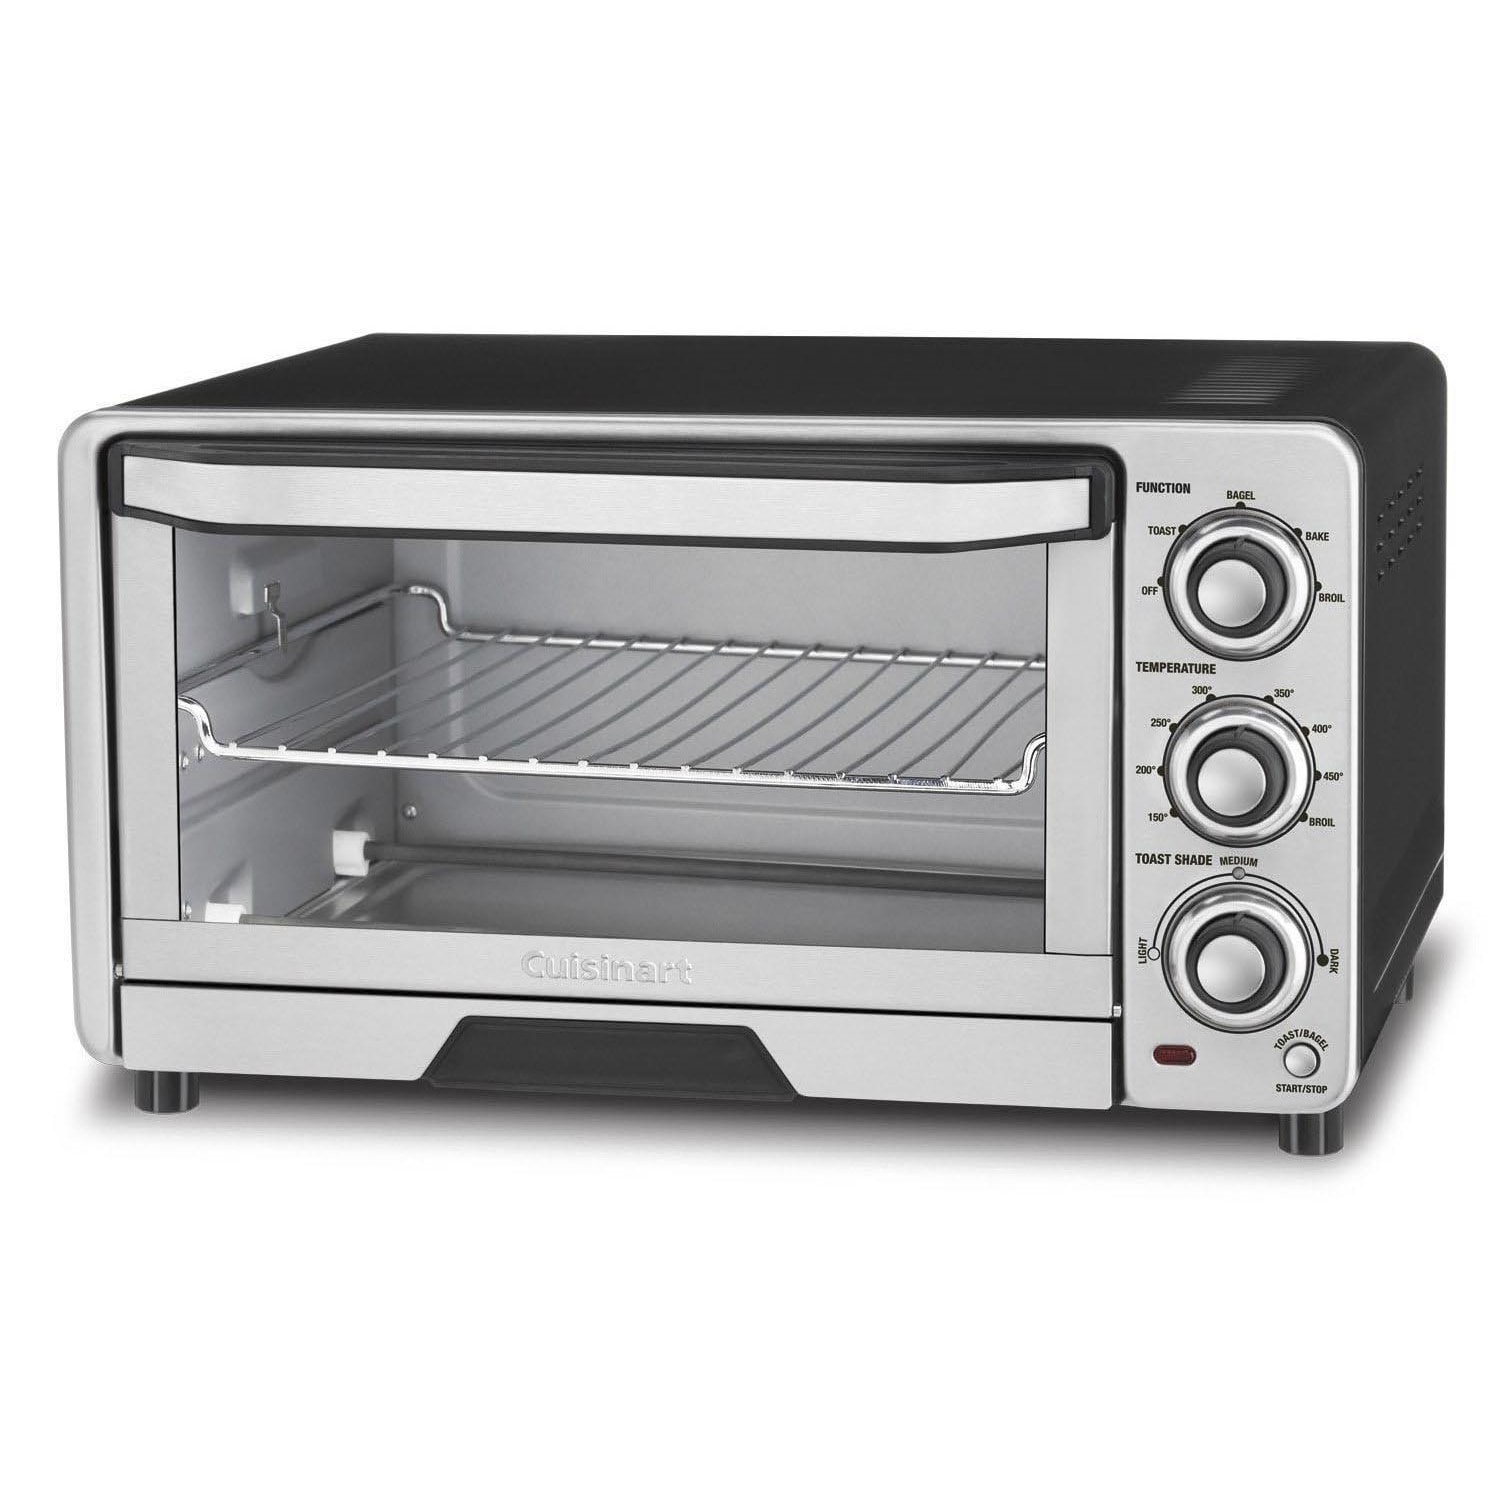 https://ak1.ostkcdn.com/images/products/12949619/Cuisinart-Custom-Classic-Toaster-Oven-Broiler-Black-Stainless-505f117f-7bfe-4cdf-8755-f4859e660311.jpg